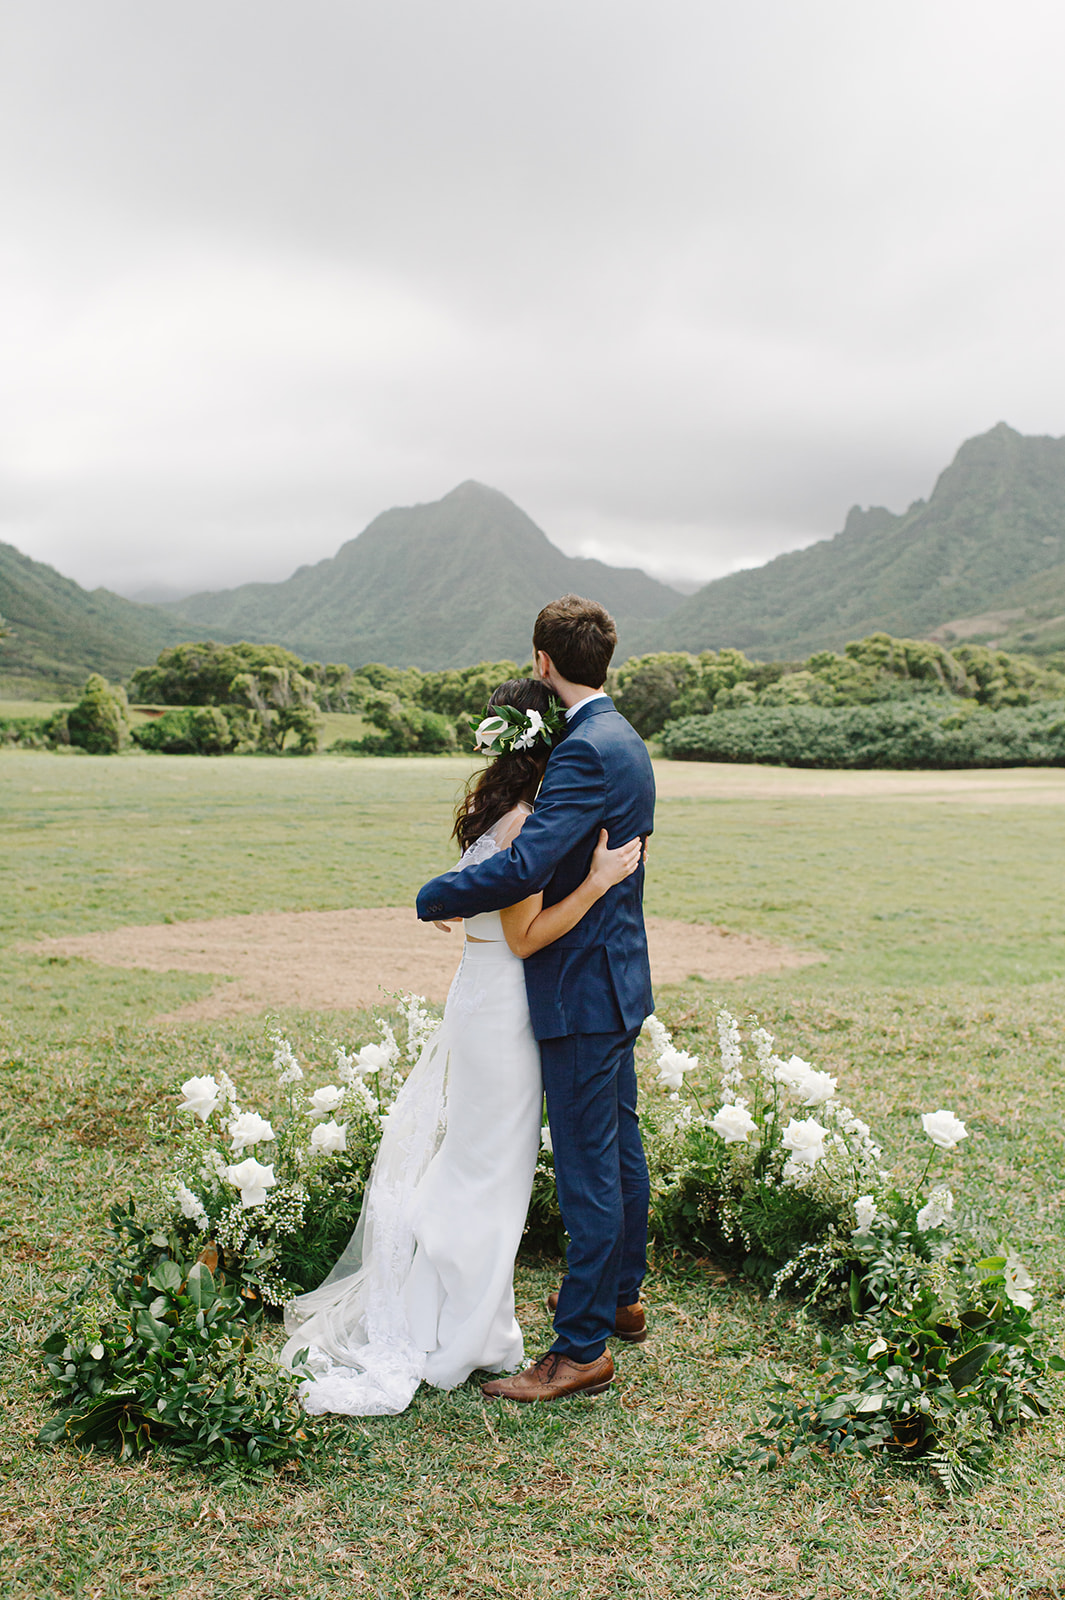 Enchanting embrace of the bride and groom amidst white florals, with the majestic mountains providing a breathtaking backdrop L Hewitt Photography